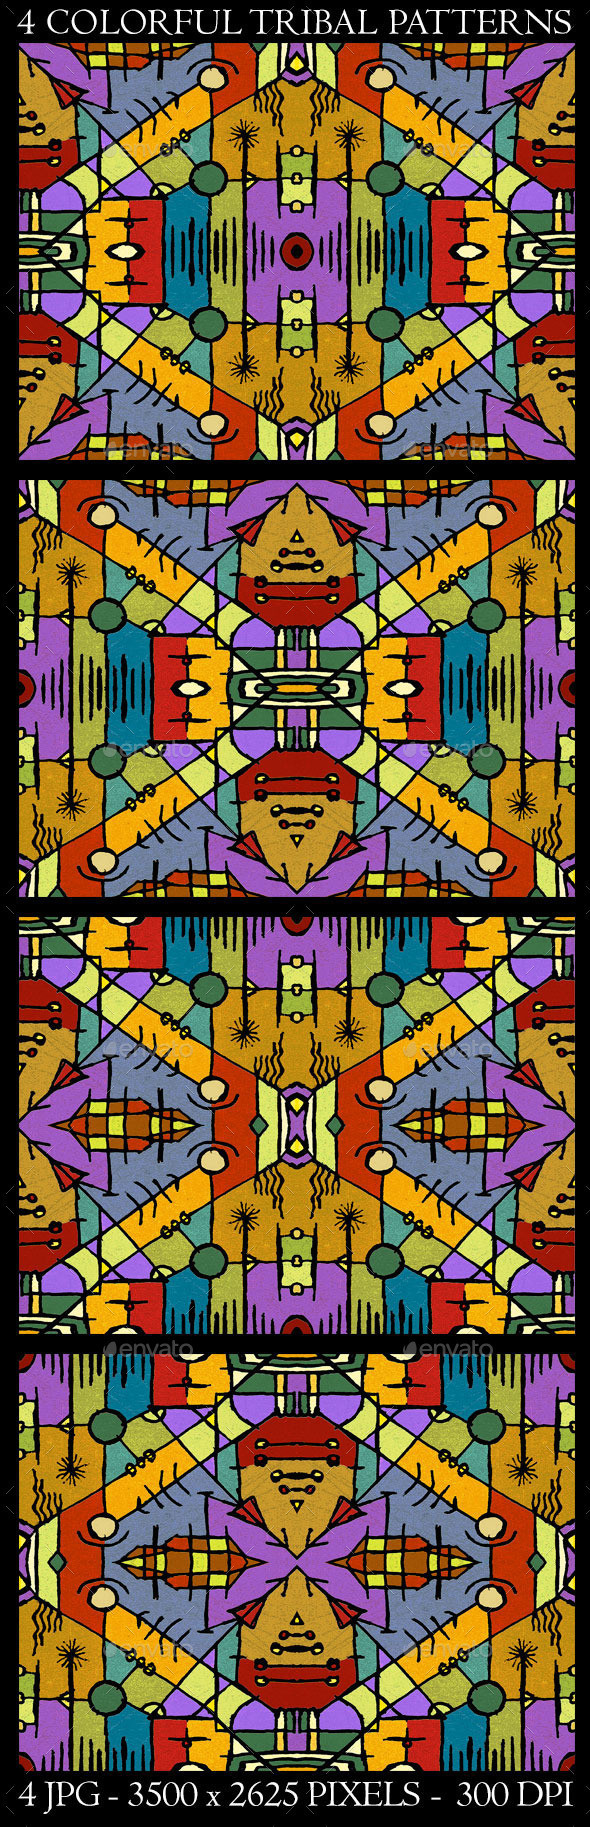 Preview 4 colorful tribal patterns